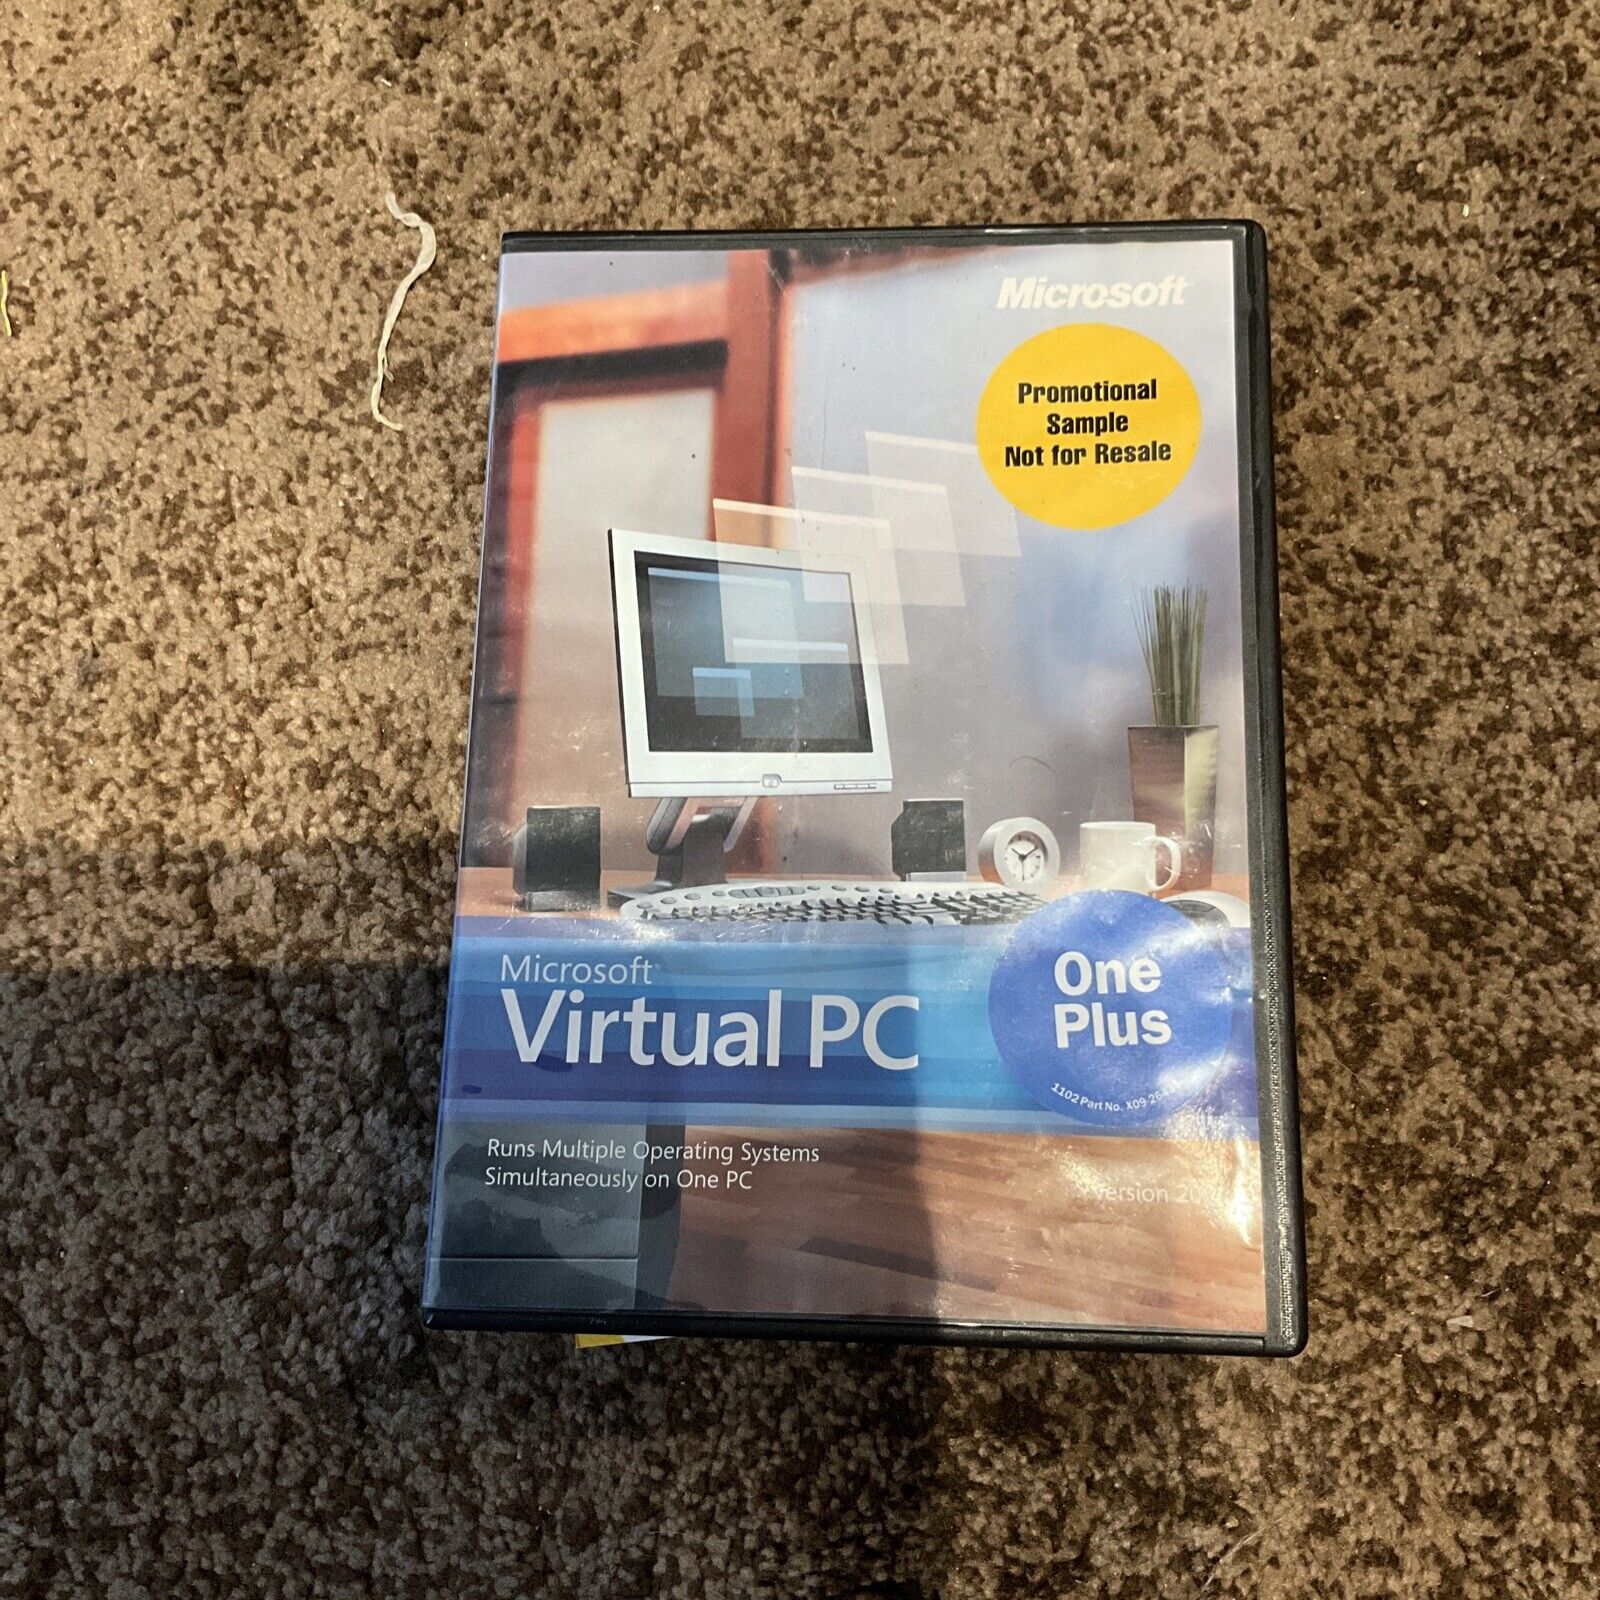 MICROSOFT VIRTUAL PC VERSION 2004 RUNS MULTIPLE OPERATING SYSTEMS ON ONE PC